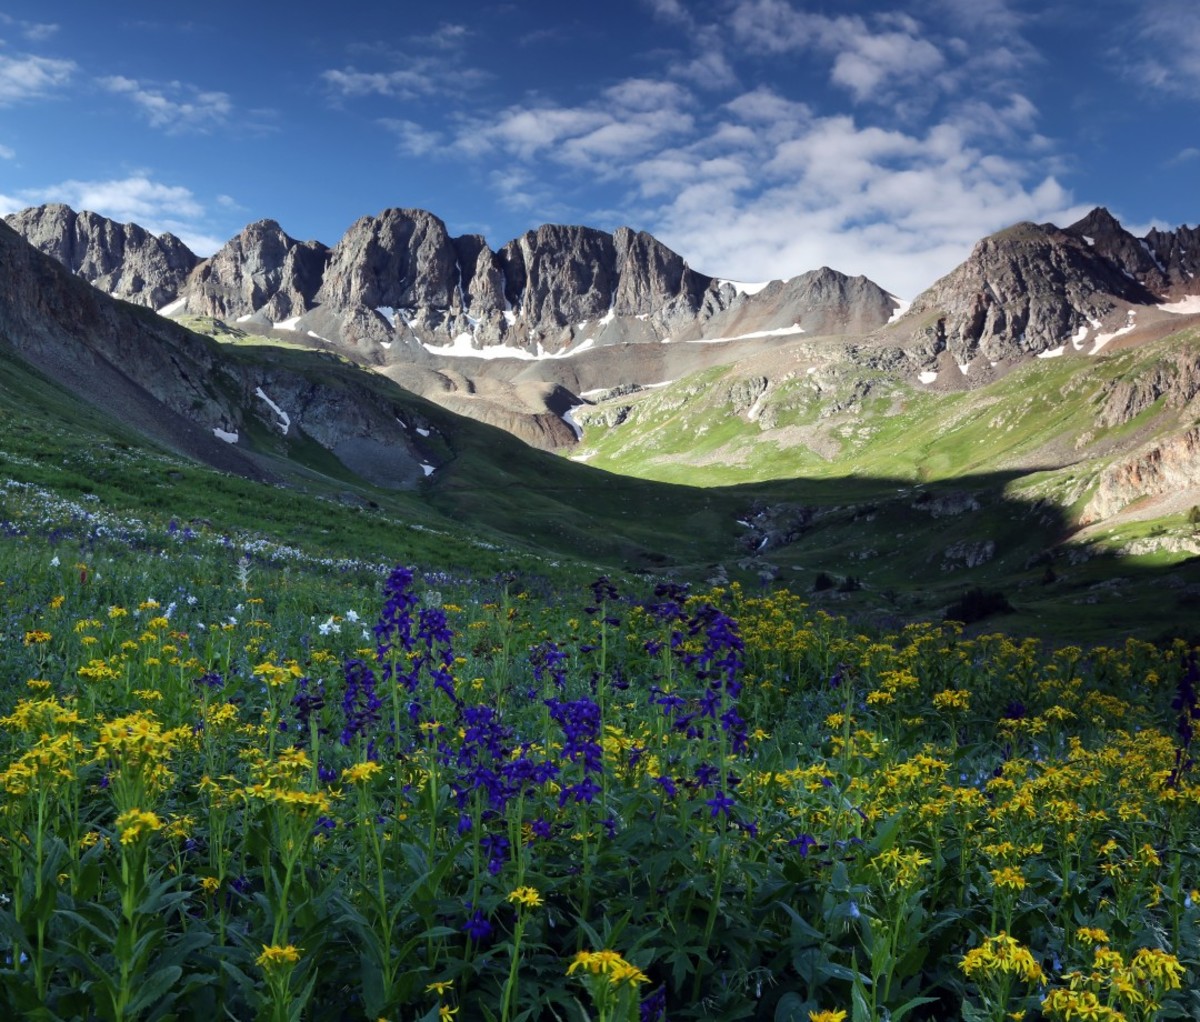 Summer wildflowers high up in the Colorado Rocky Mountains near Lake City, Co. American Basin is off Cinnamon Pass Road on the Alpine Loop Scenic Byway in the San Juan Mountains.